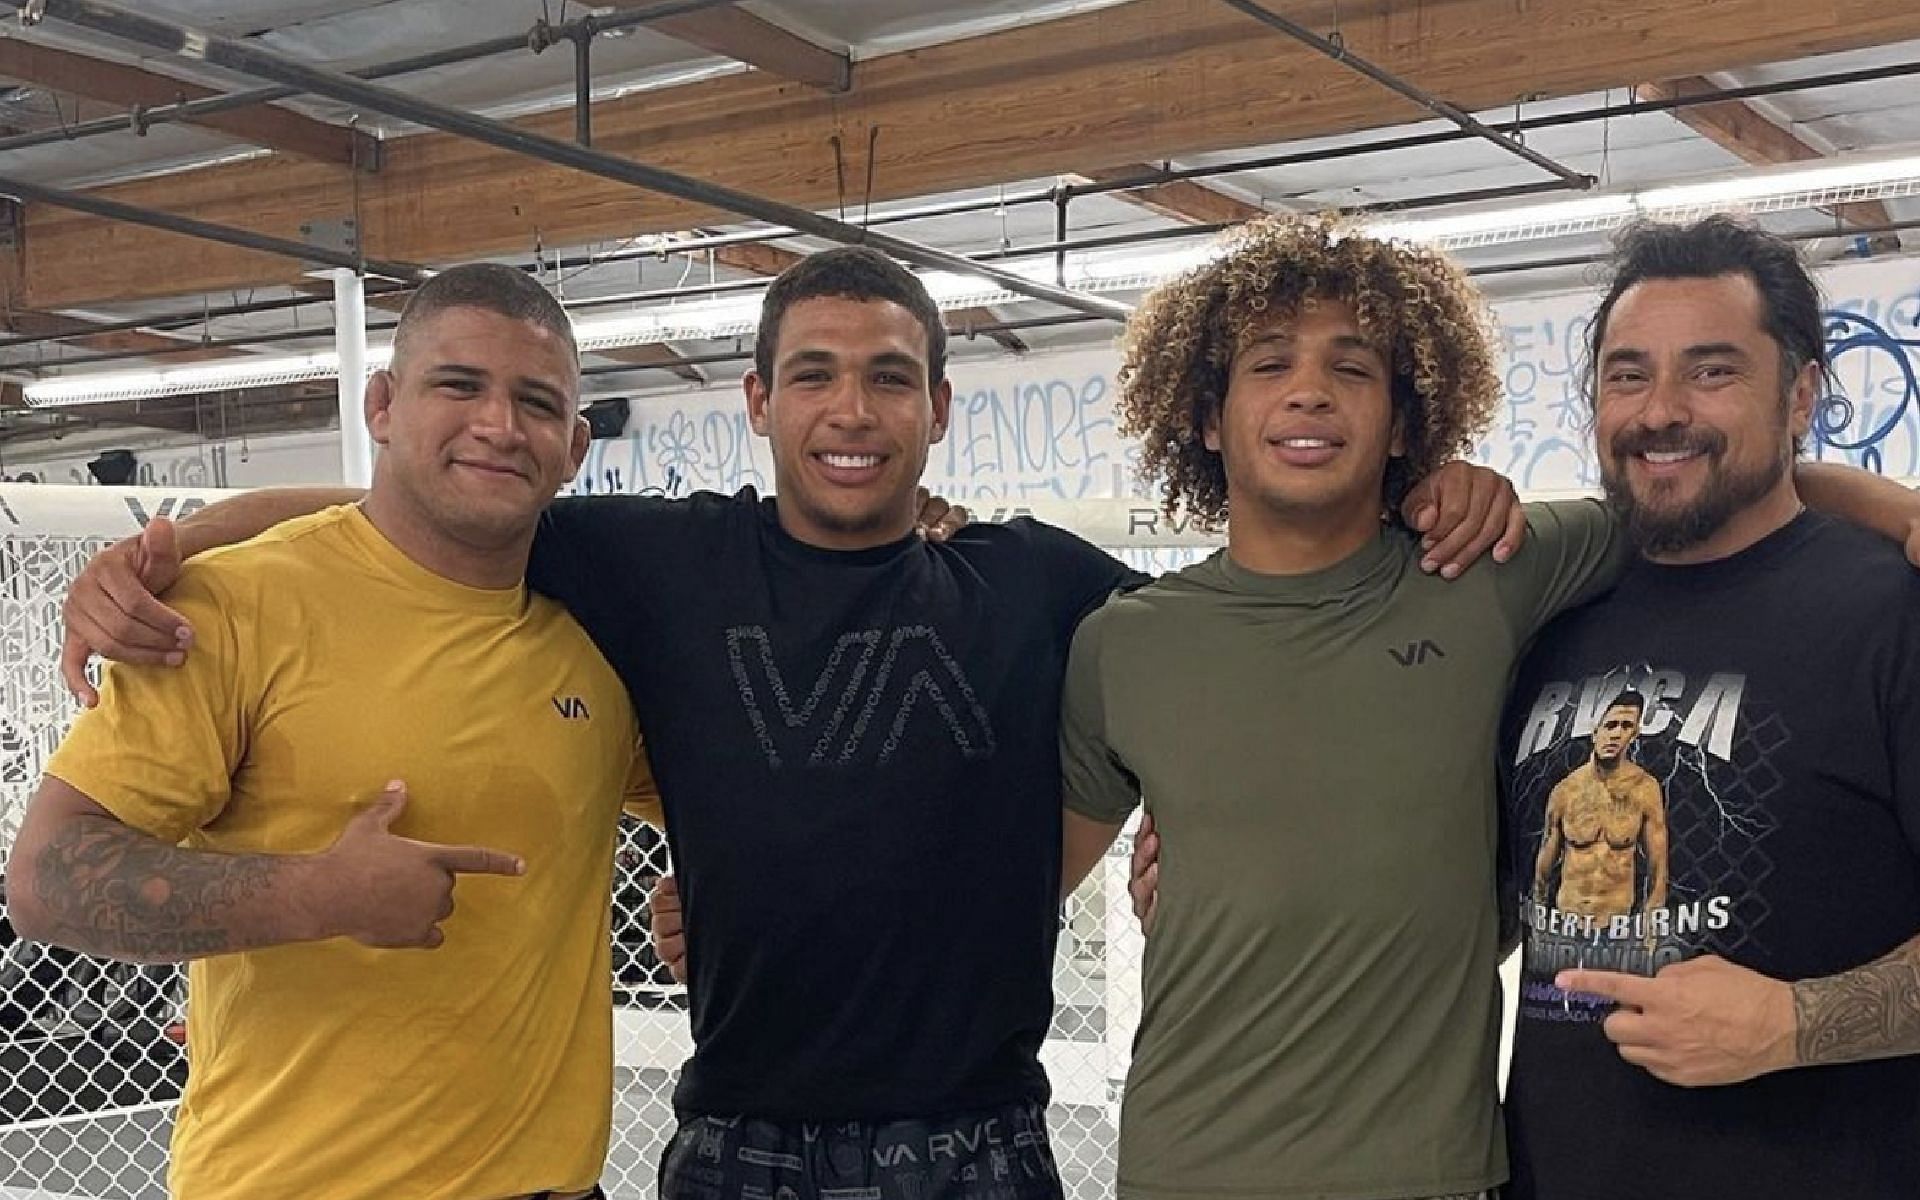 The Ruotolo brothers Tye and Kade (second and third from left) trains with Gilbert Burns and PM Tenore. [Photo Ruotolo brothers Instagram]